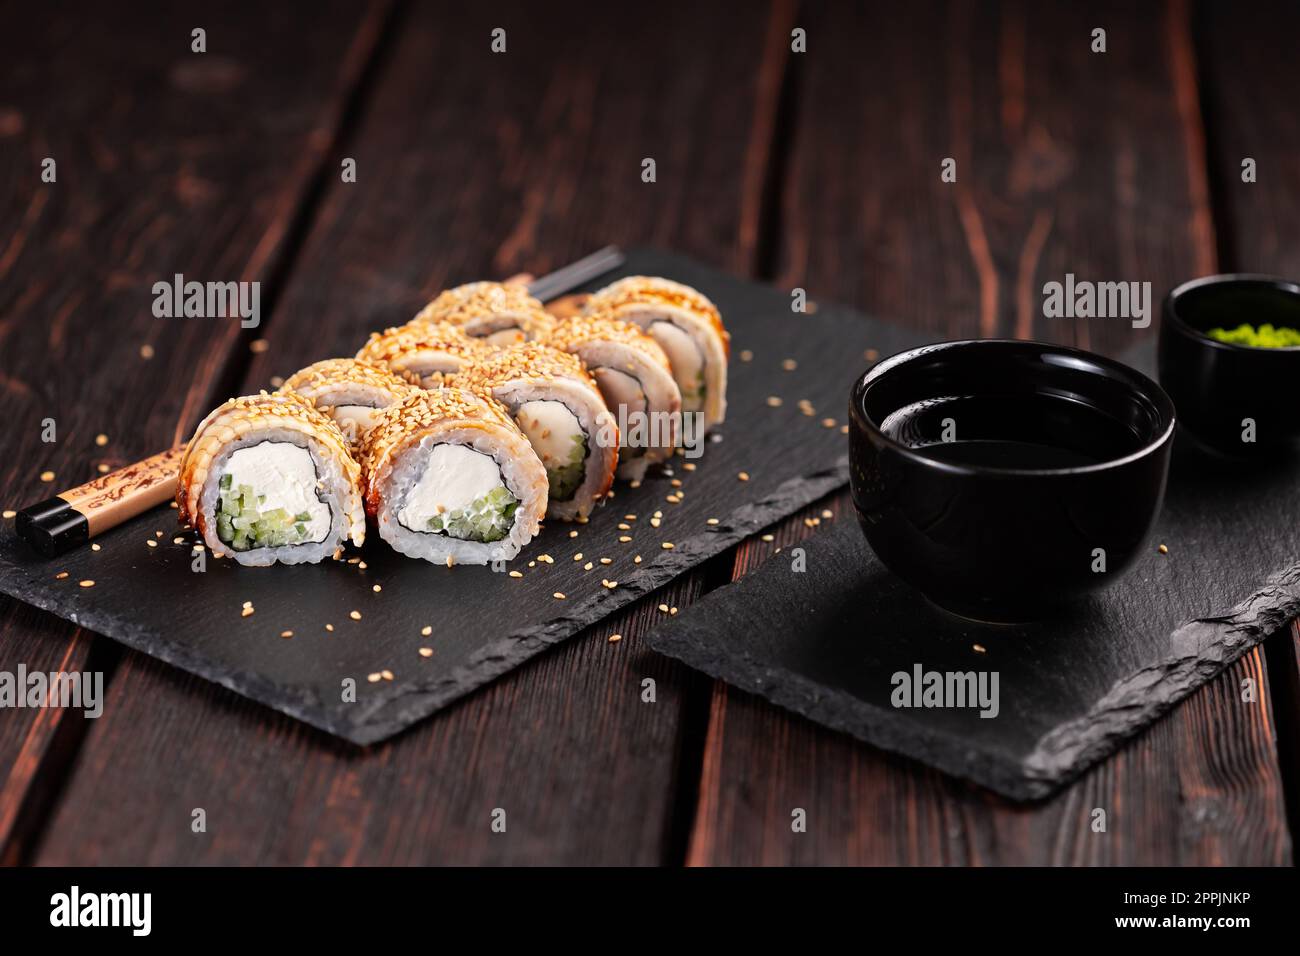 Premium Photo  Japanese food sushi rolls with eel and cream cheese topped  with unagi sauce